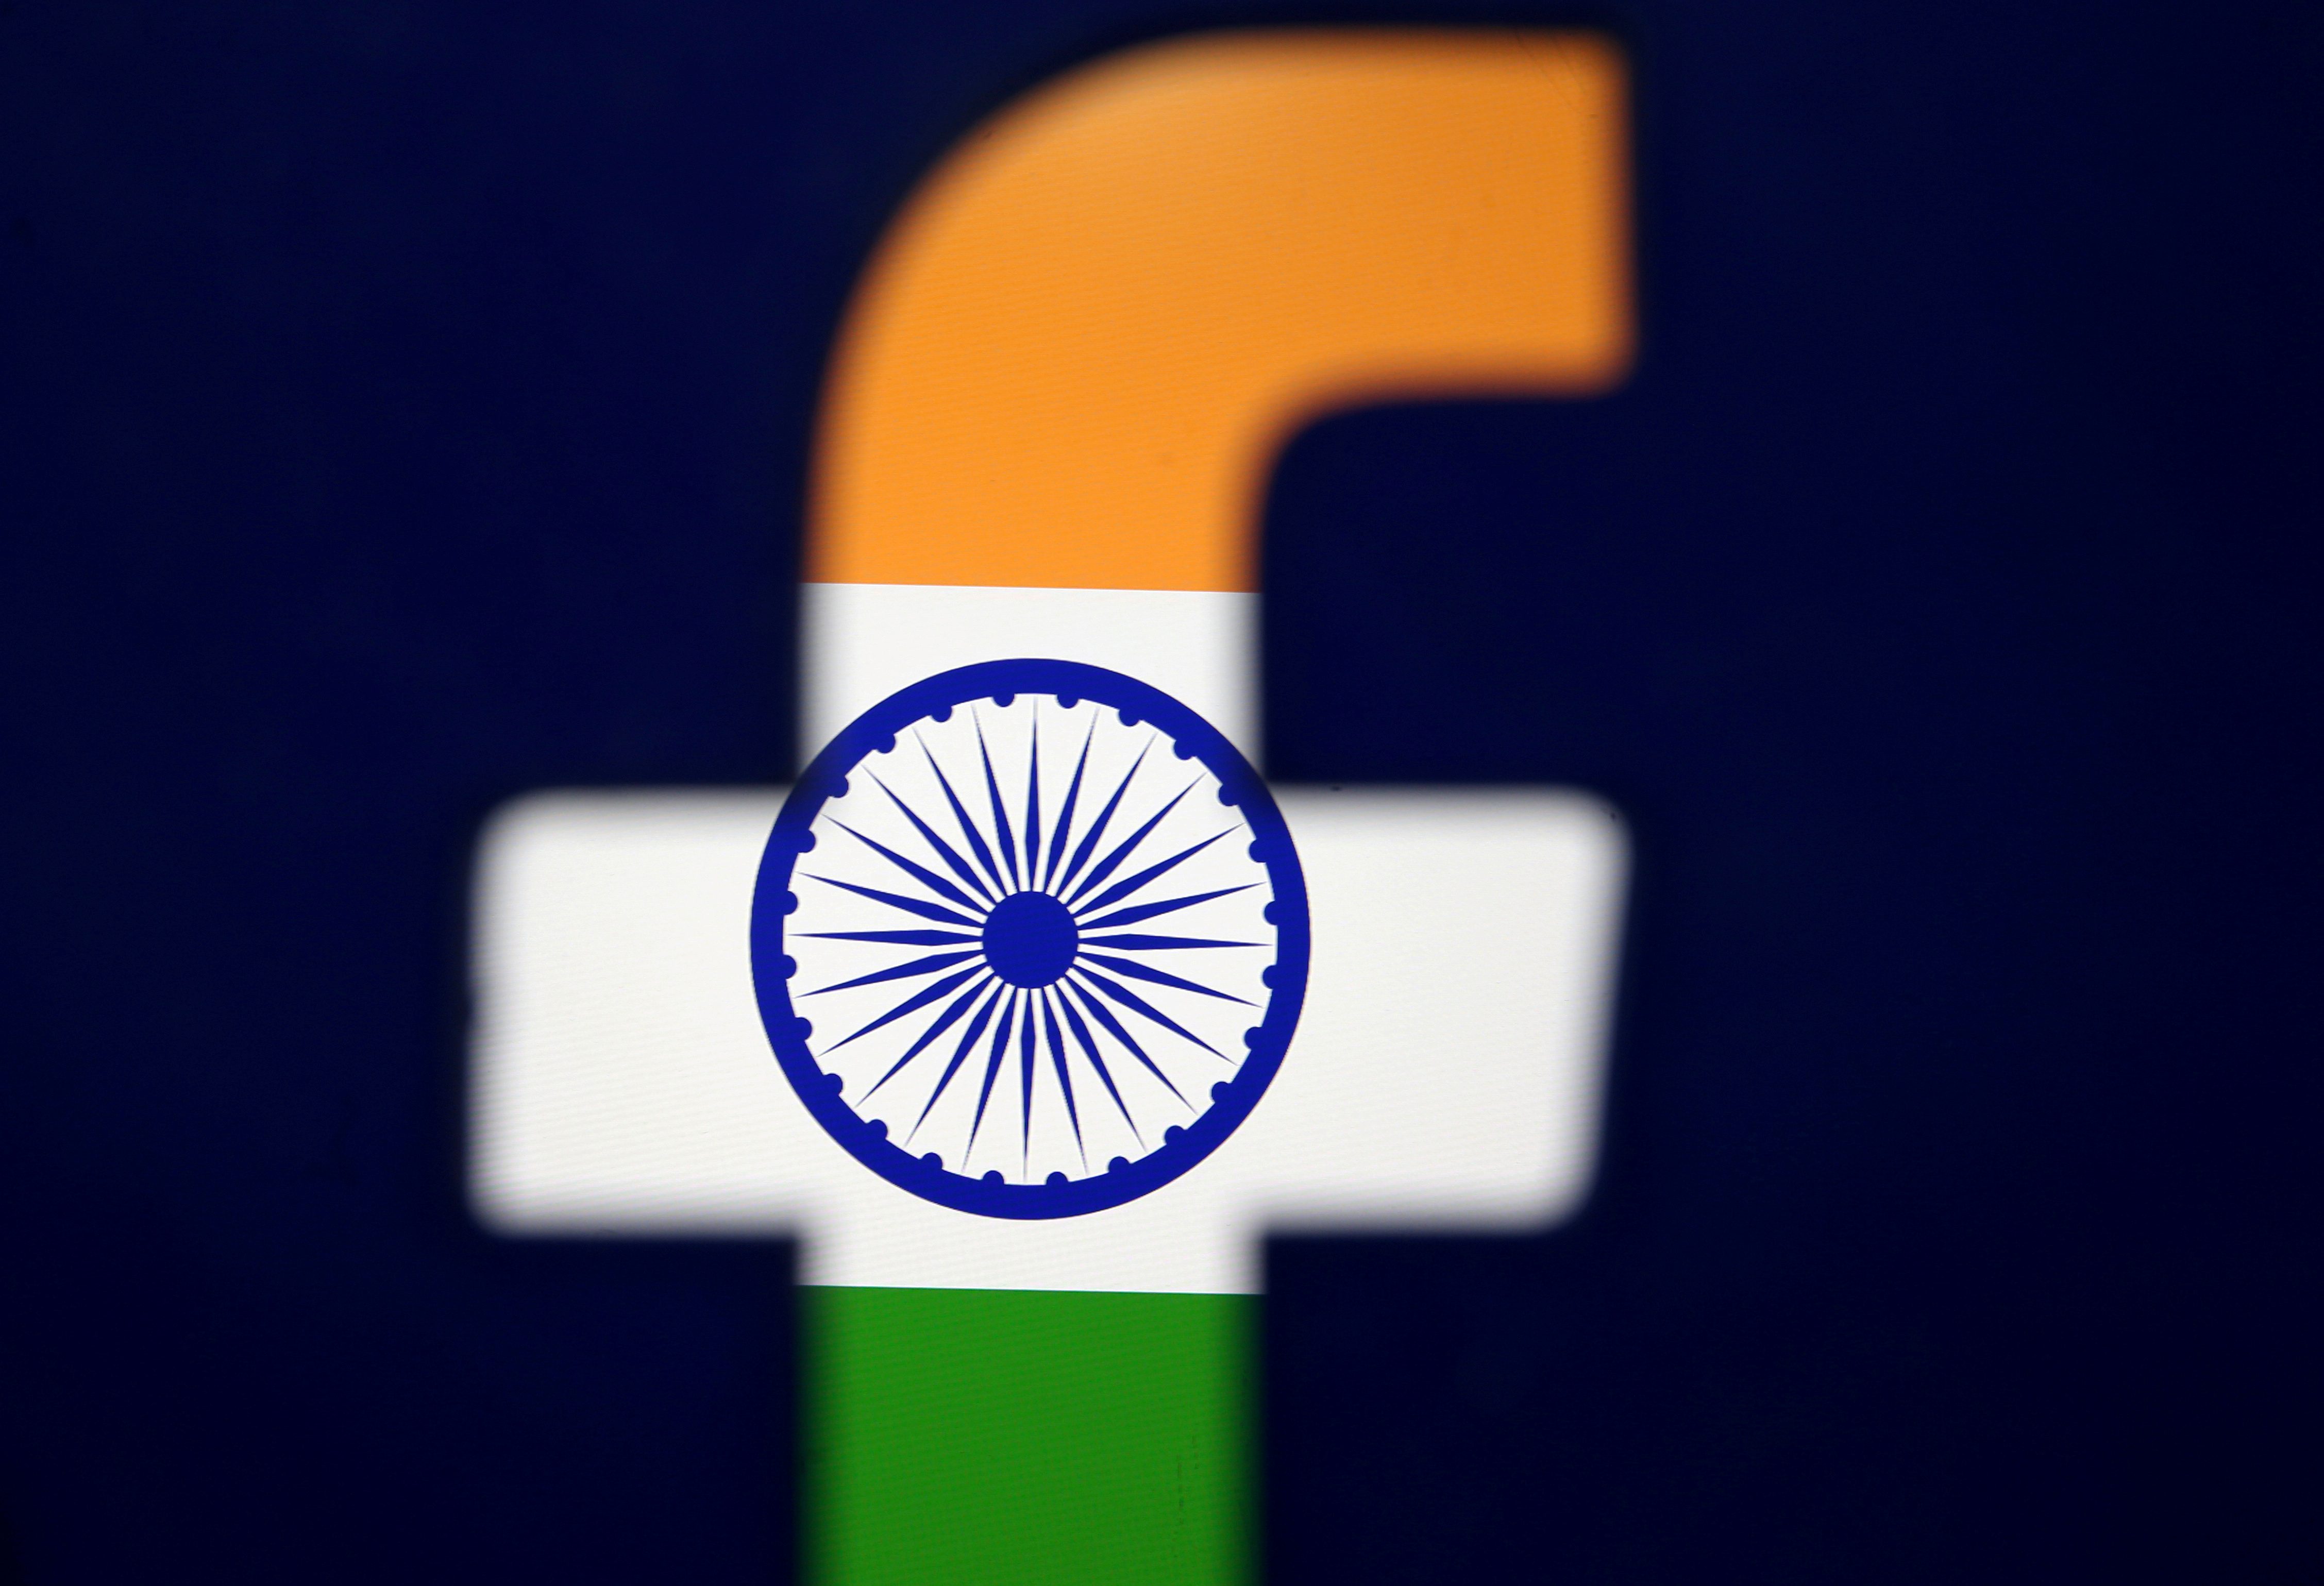 Facebook to curb hate speech as Indian states go to polls